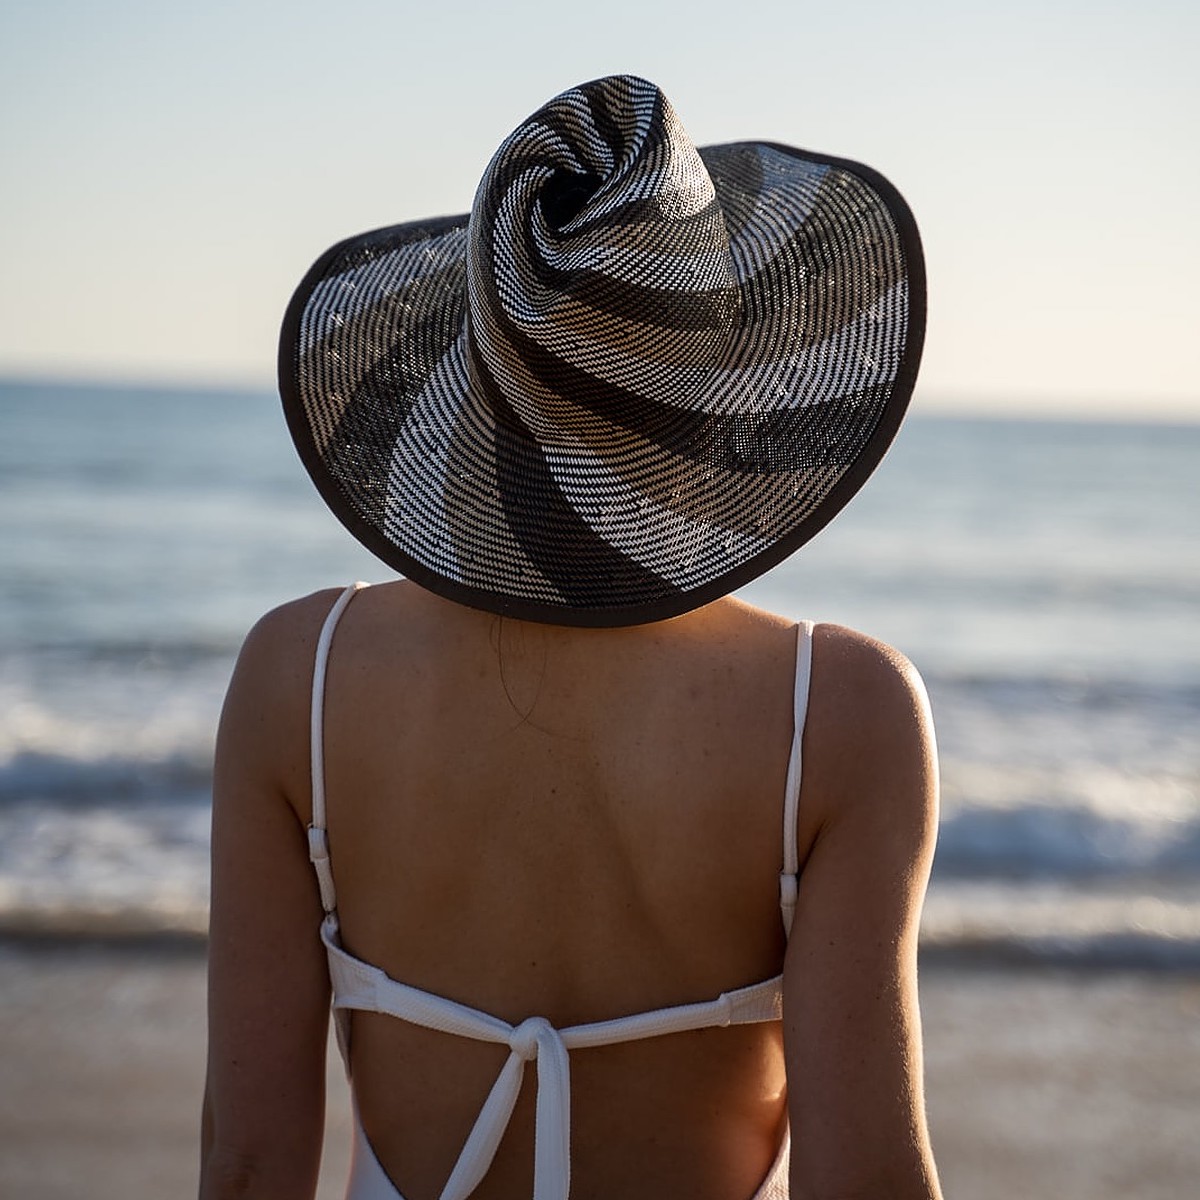 The Best Sun Hats for Women According to Our Readers